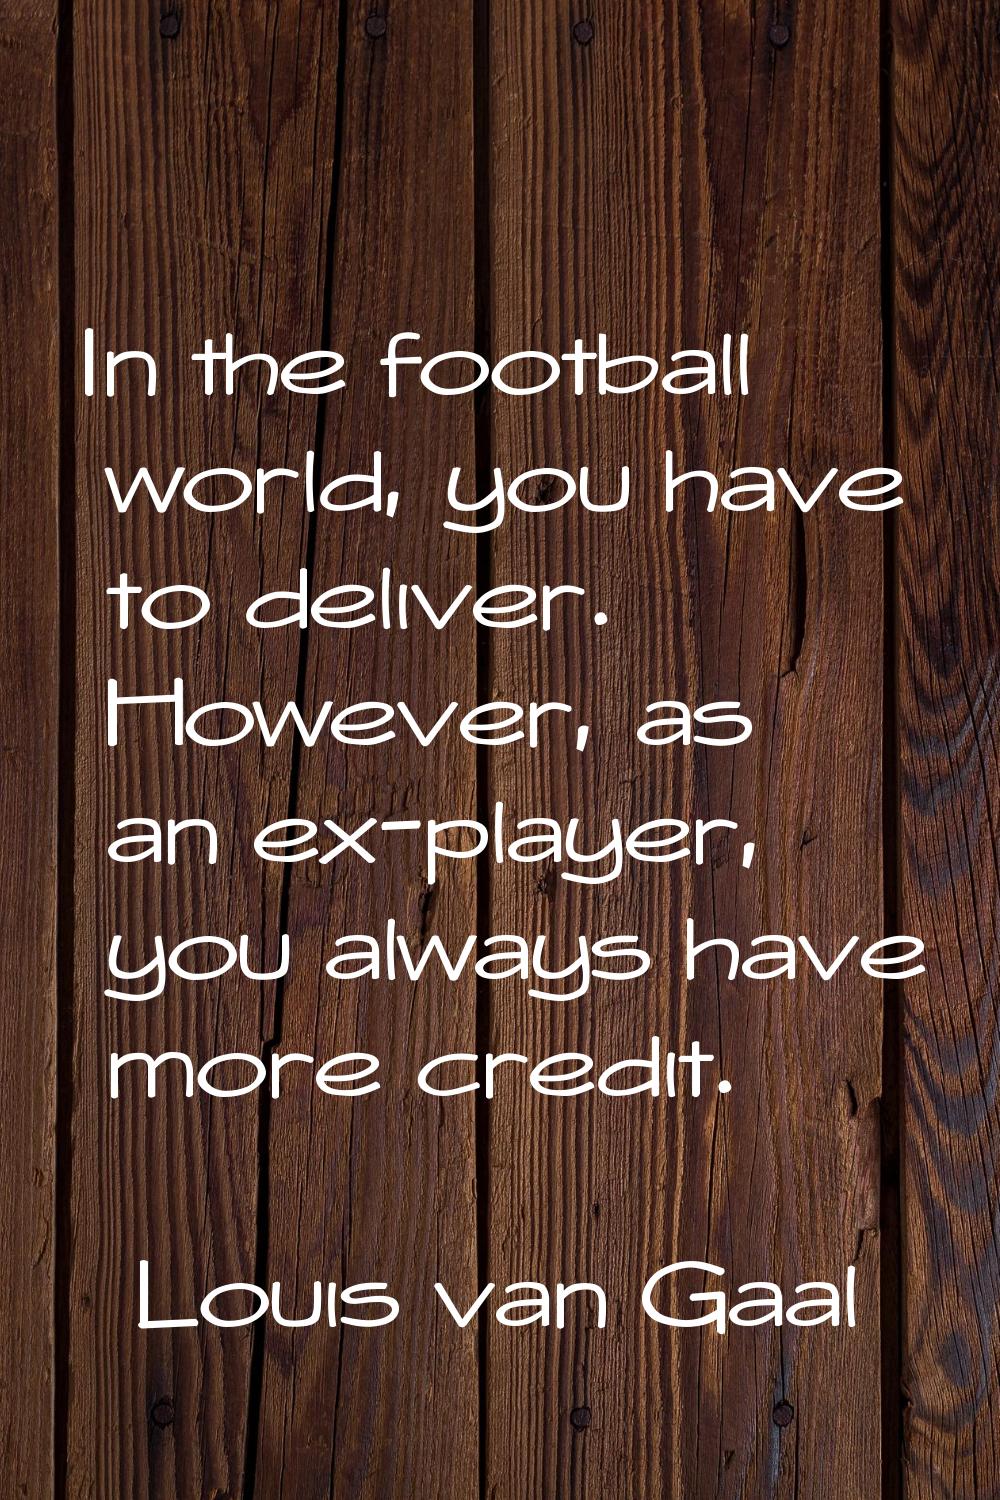 In the football world, you have to deliver. However, as an ex-player, you always have more credit.